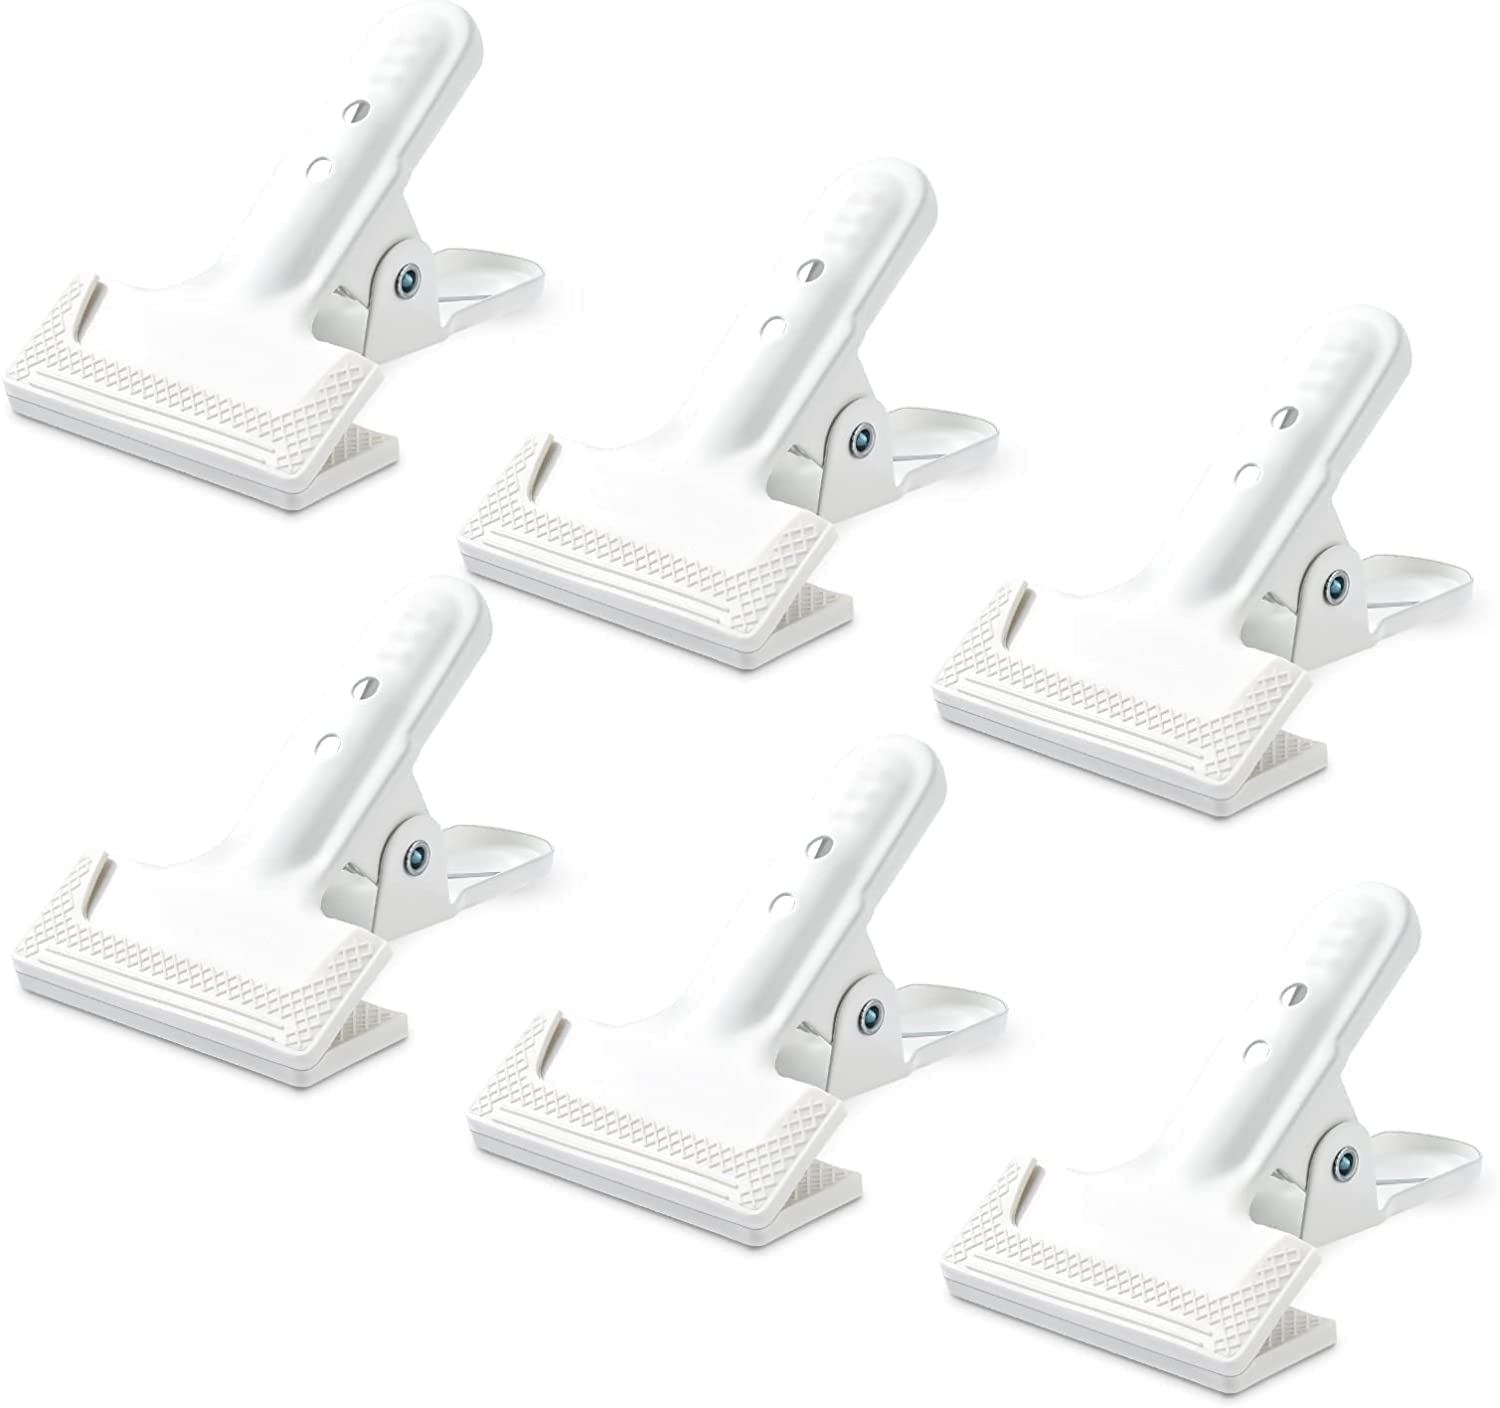 KAGYOKU Backdrop Spring Clamps 6 Pack Large Heavy Duty Photography Backdrop 4" Clips for Background Backdrops Stand, Woodworking, Home Improvement (White)